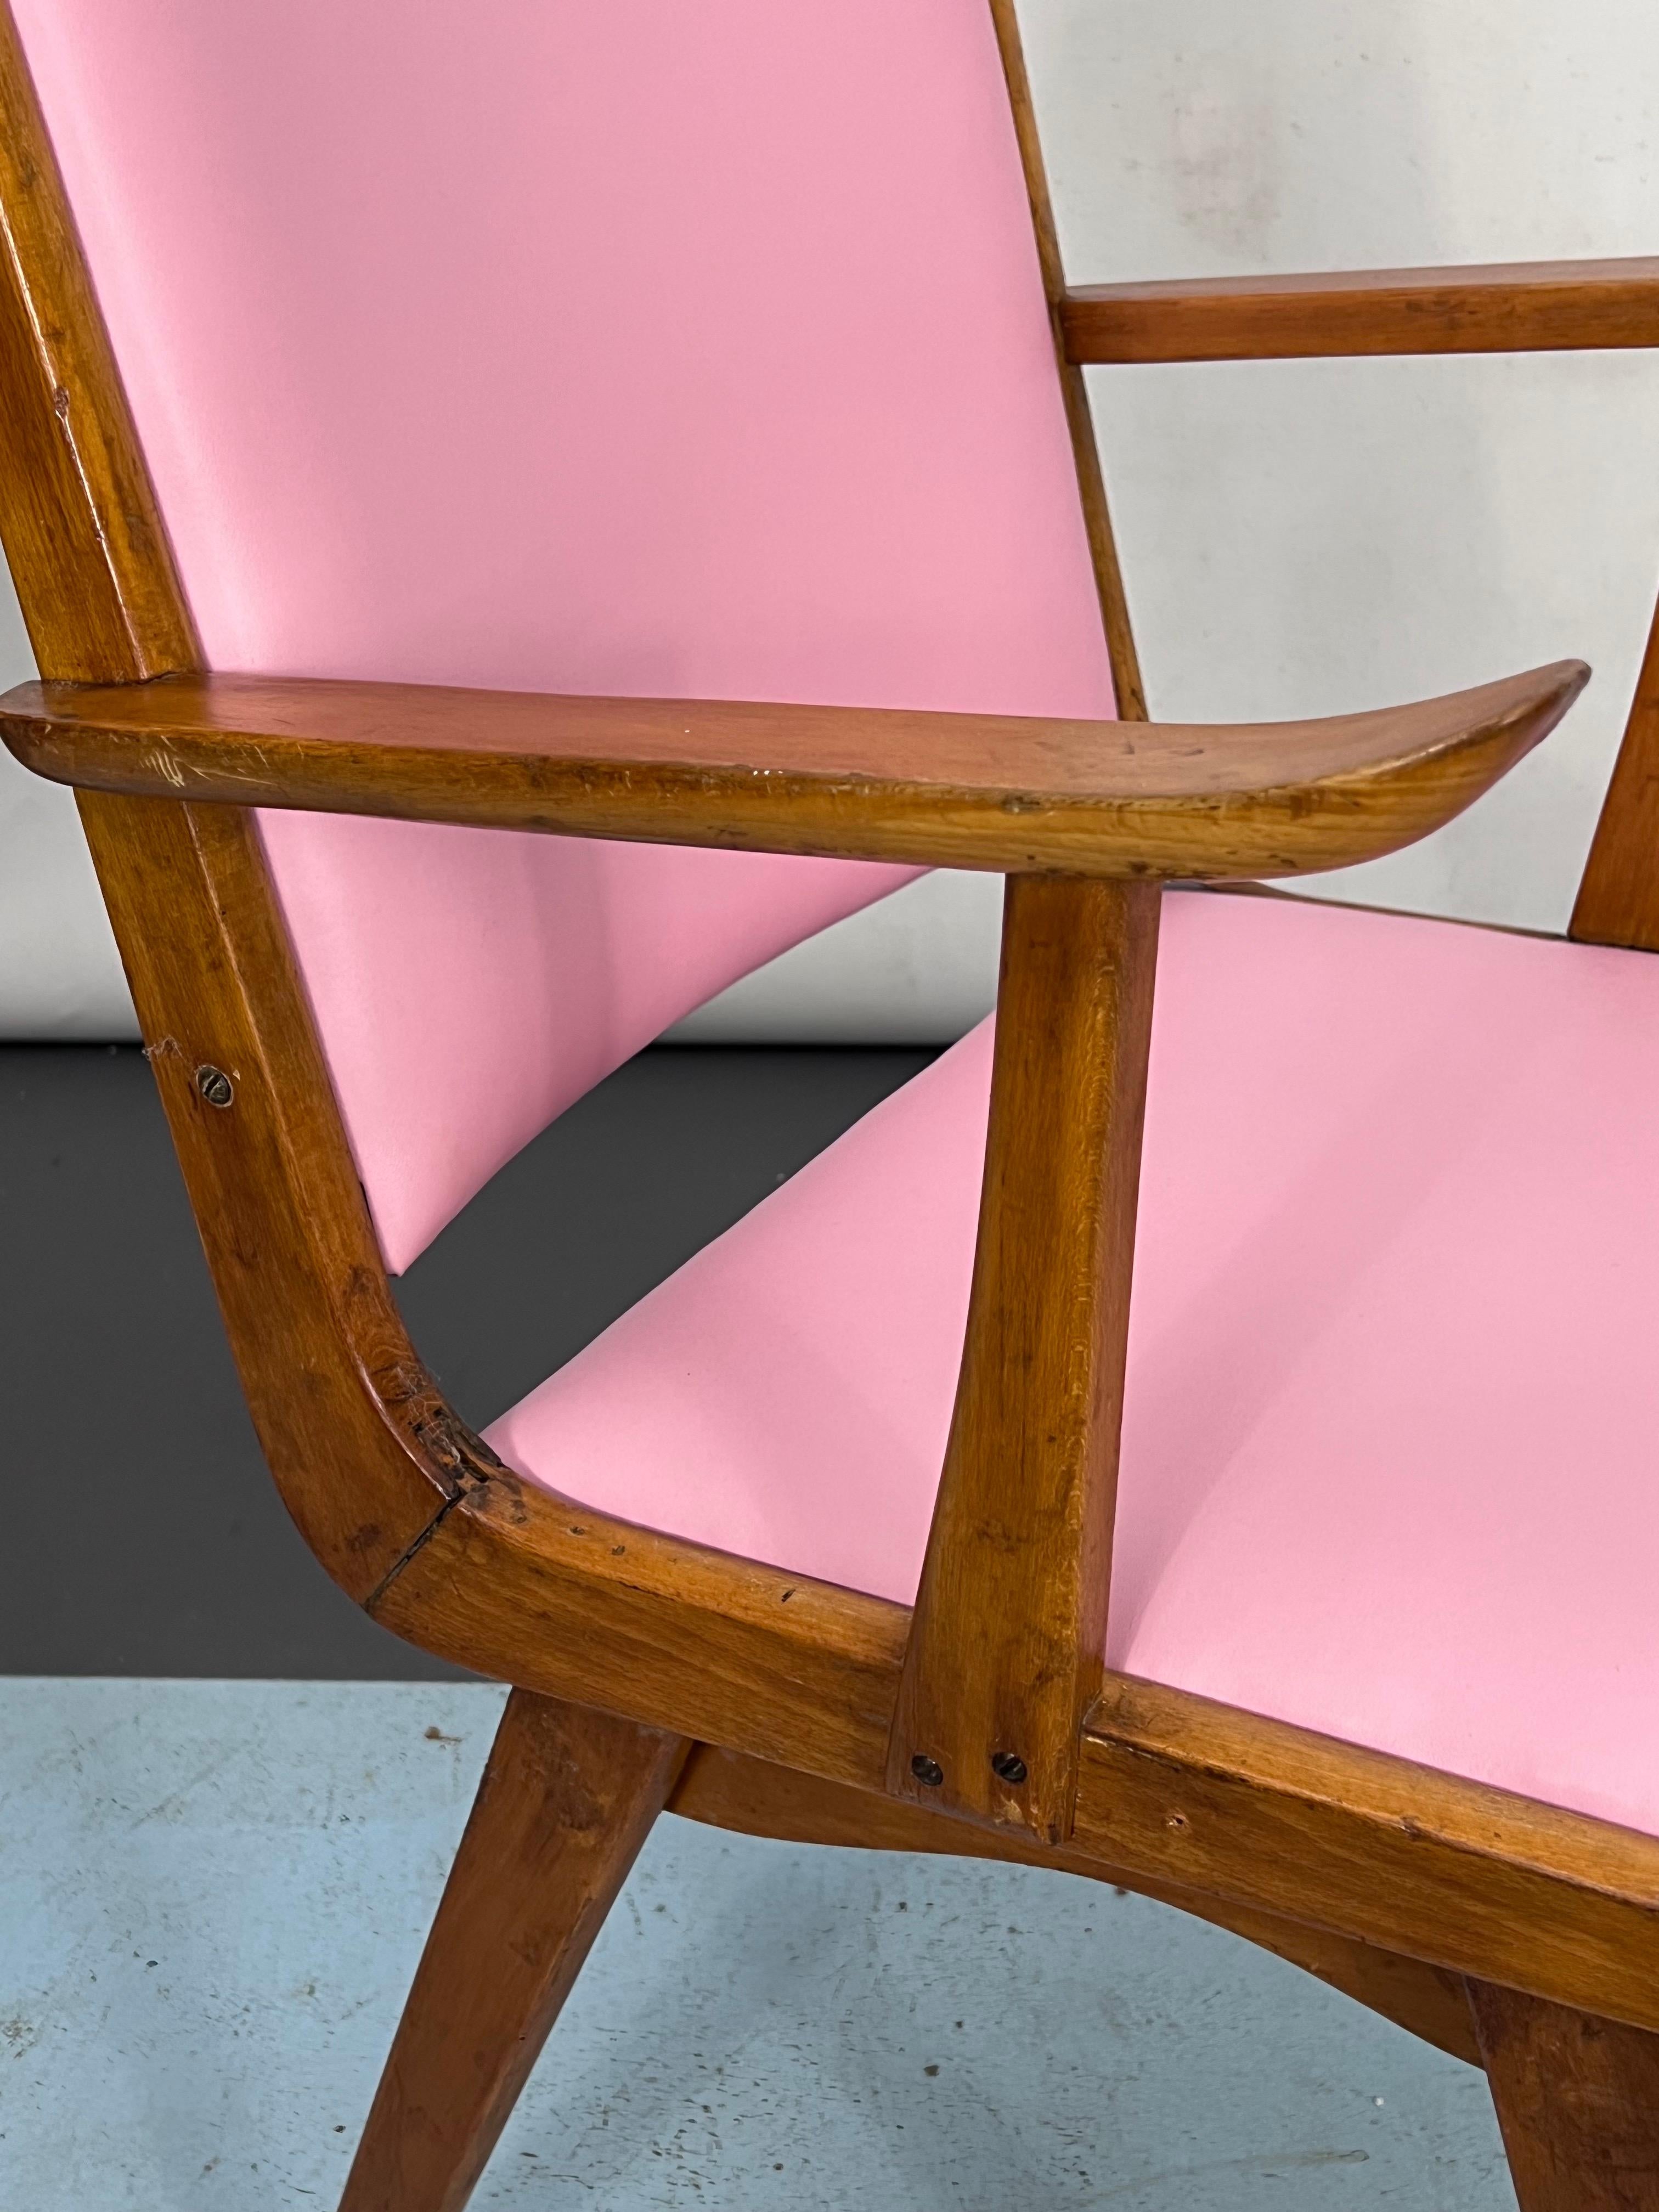 Vintage Italian Wood Accent Chair in Pink Leatherette, Italy, 1950s For Sale 4